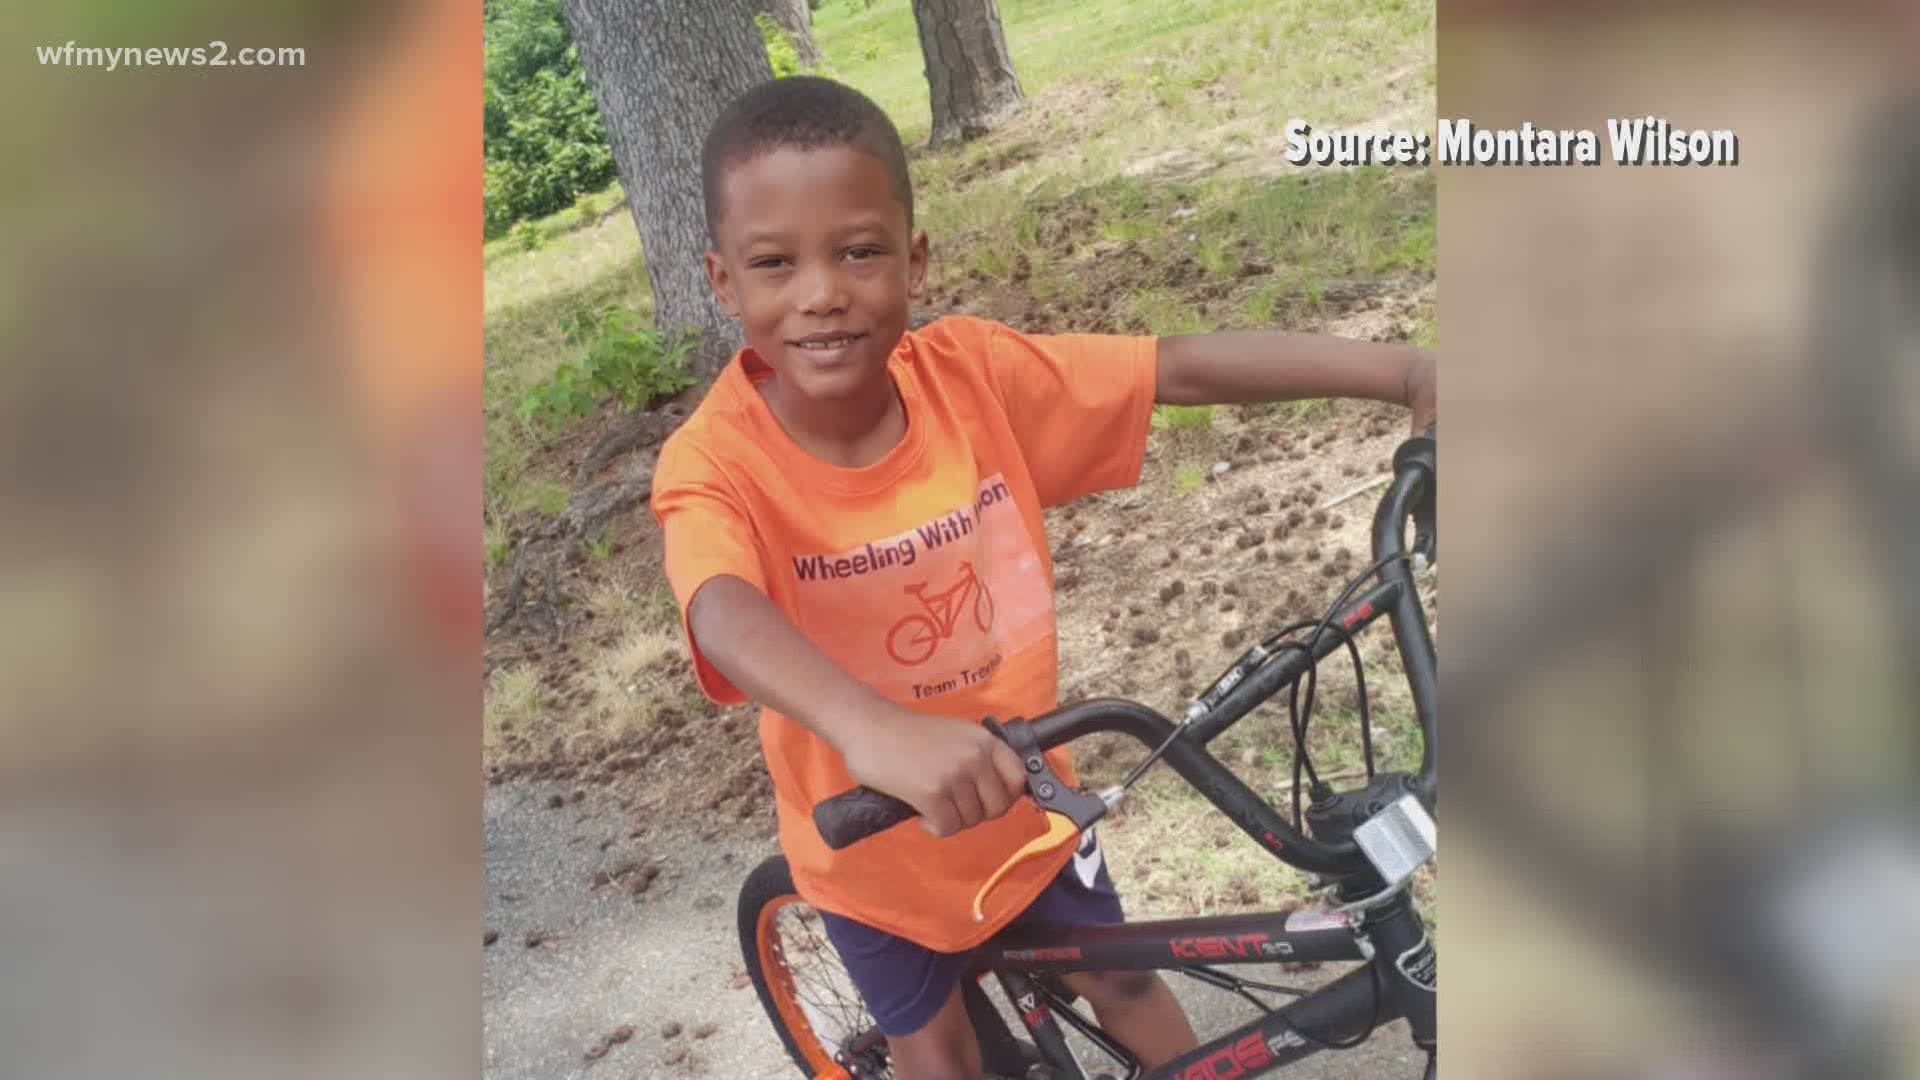 TJ Wilson has sickle cell disease. His trip to Disney World was canceled this summer because of coronavirus, but that didn't stop him from doing something special.